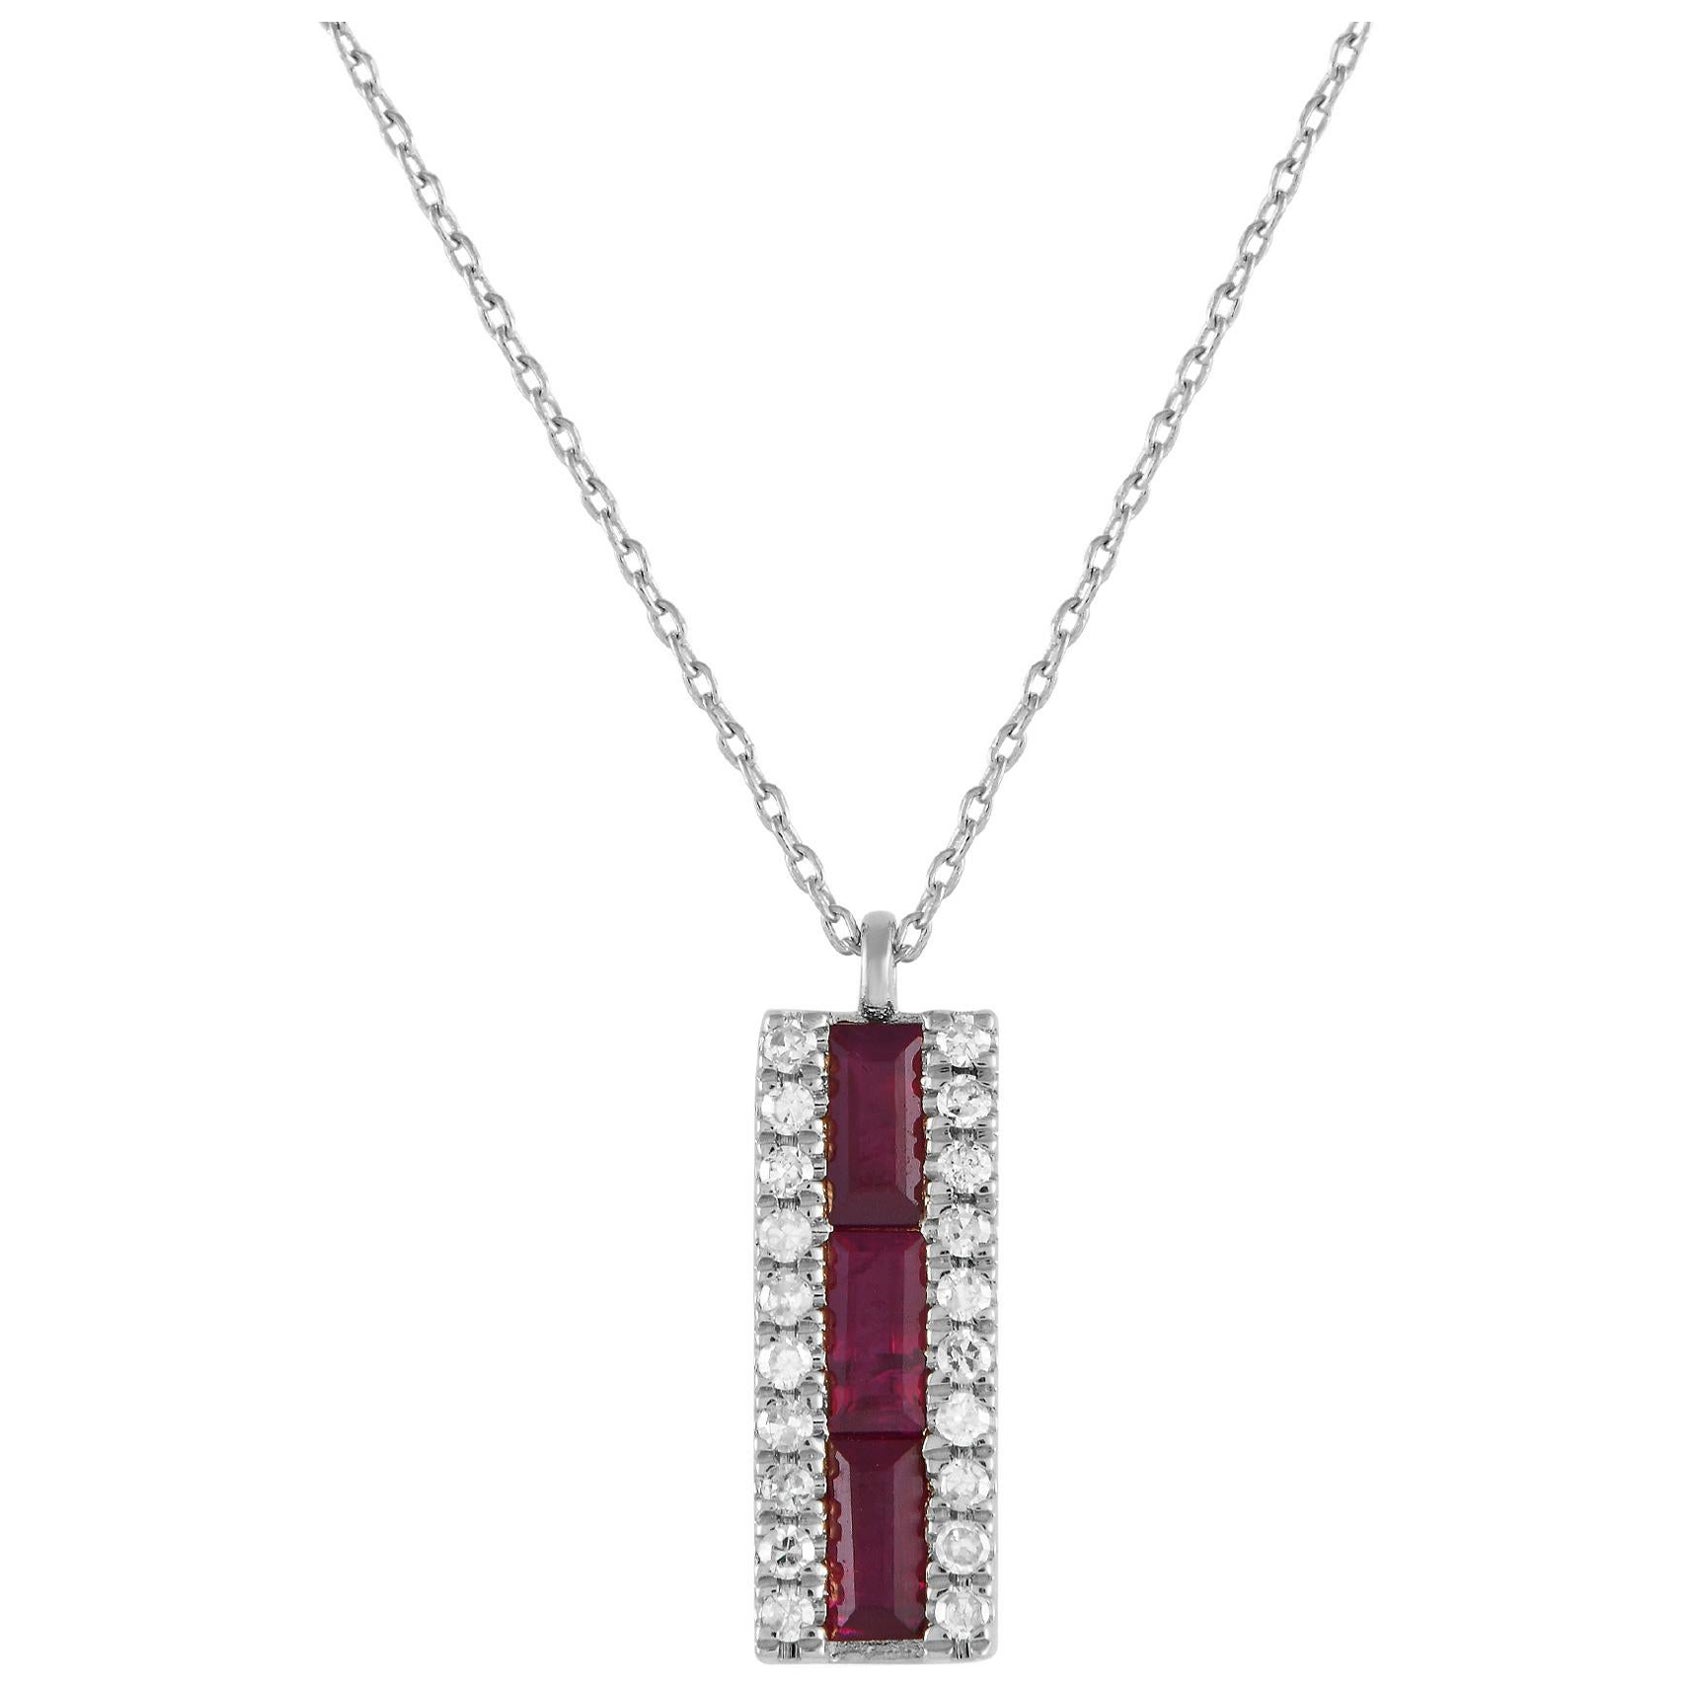 LB Exclusive 14K White Gold 0.10ct Diamond & Ruby Pendant Necklace PD4-16063WRU For Sale